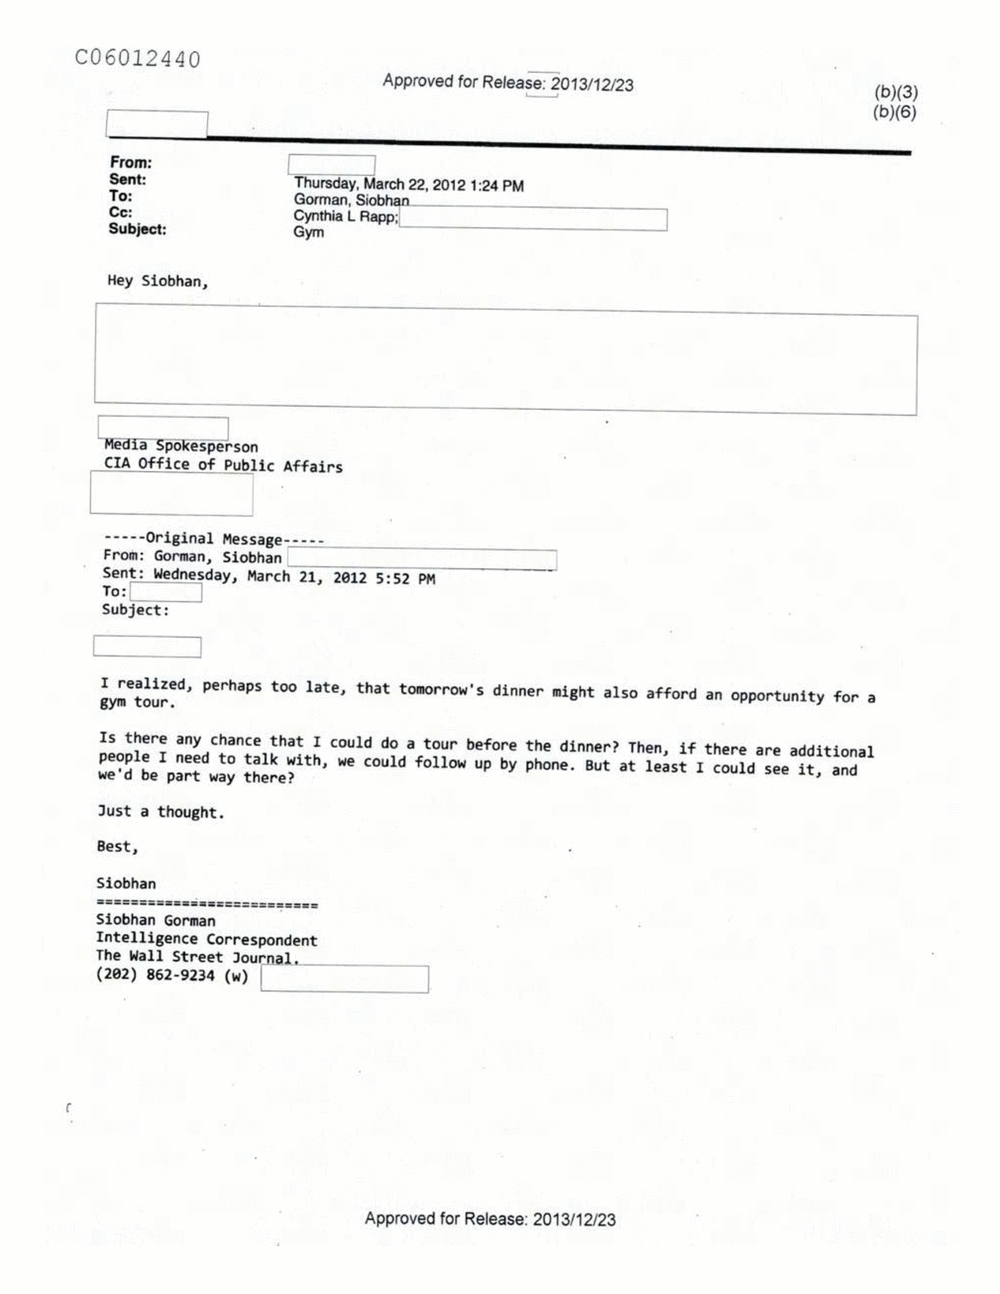 Page 24 from Email Correspondence Between Reporters and CIA Flacks